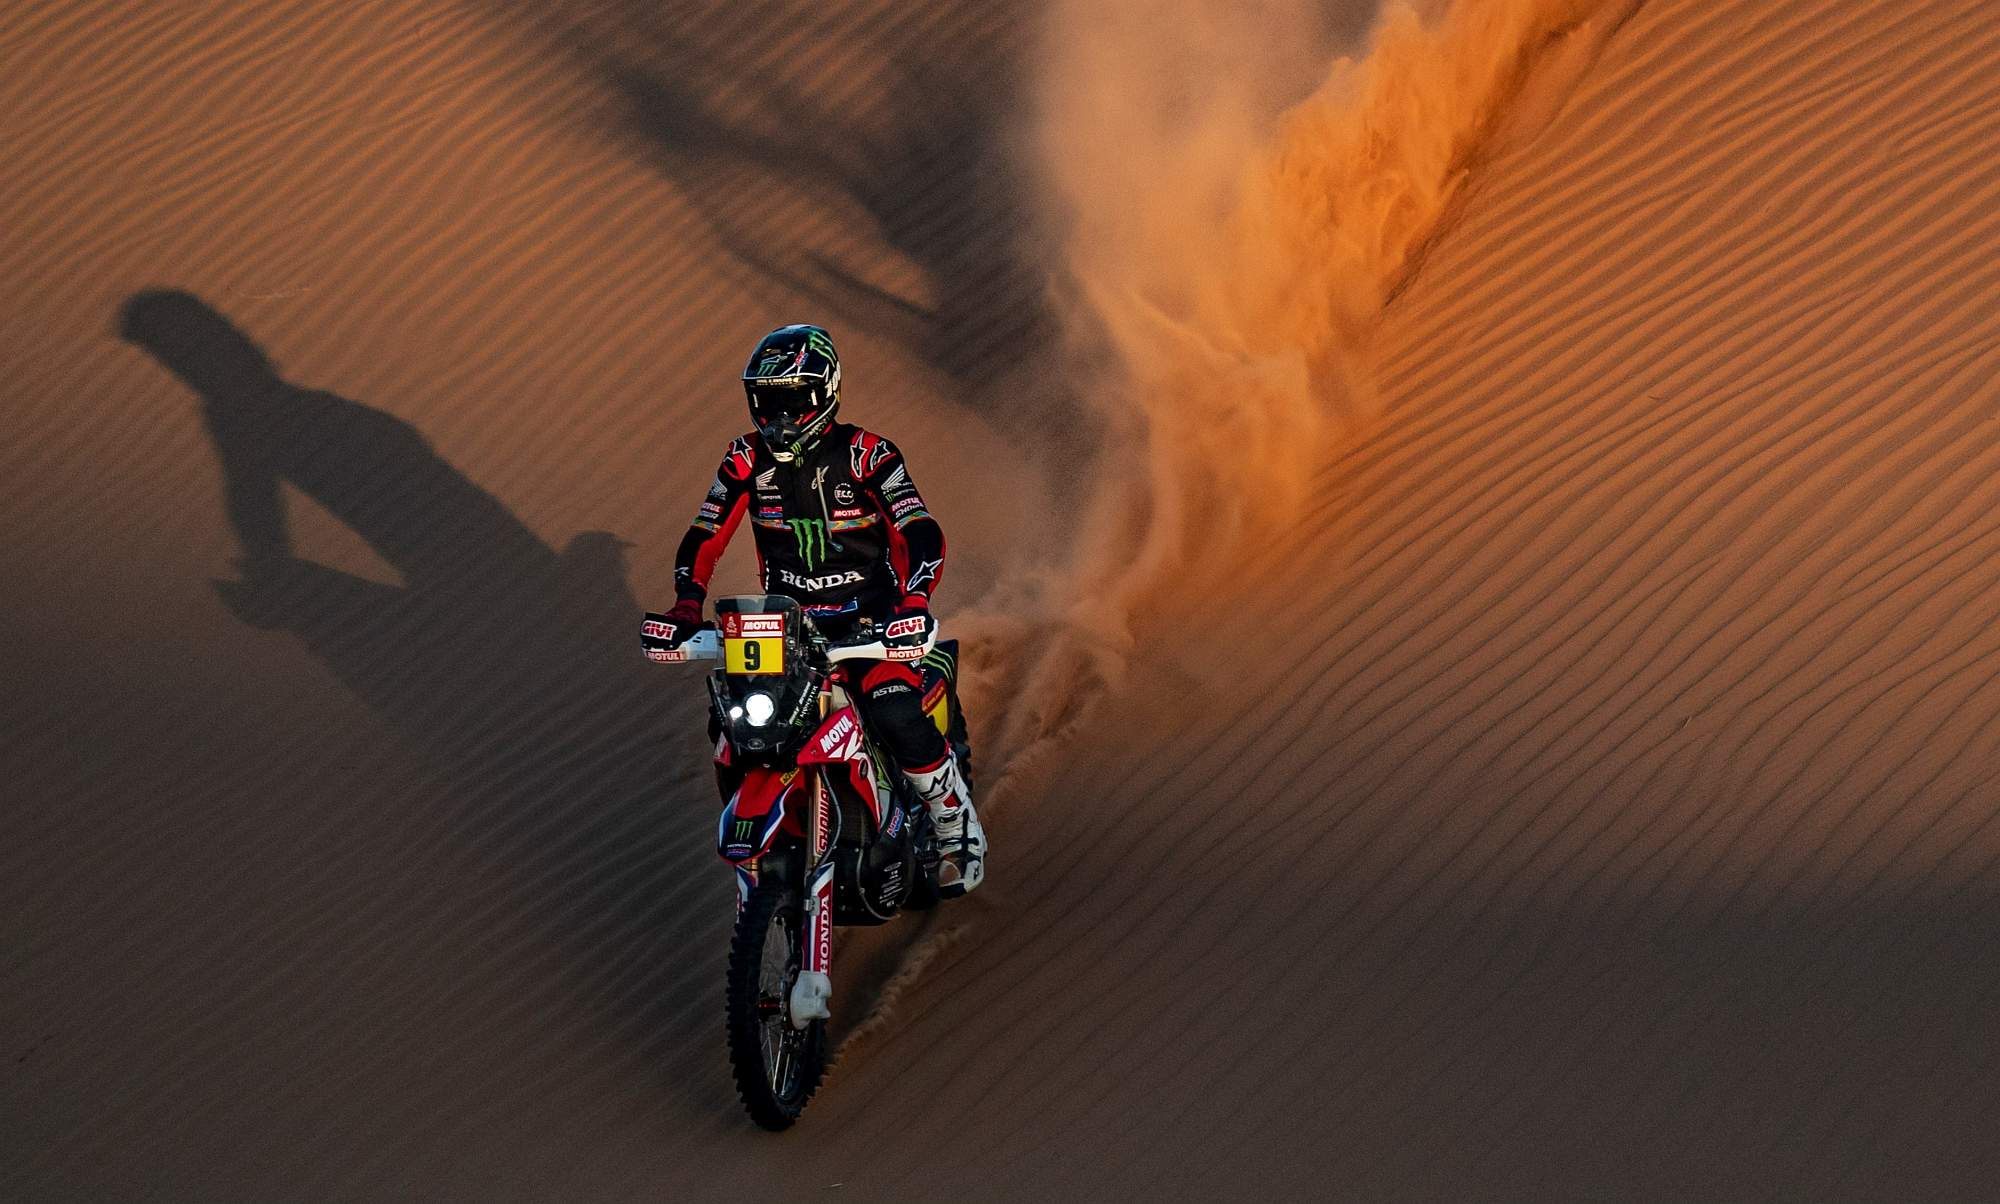 Ricky_Brabec_and_Honda_claim_the_final_victory_at_the_2020_Dakar